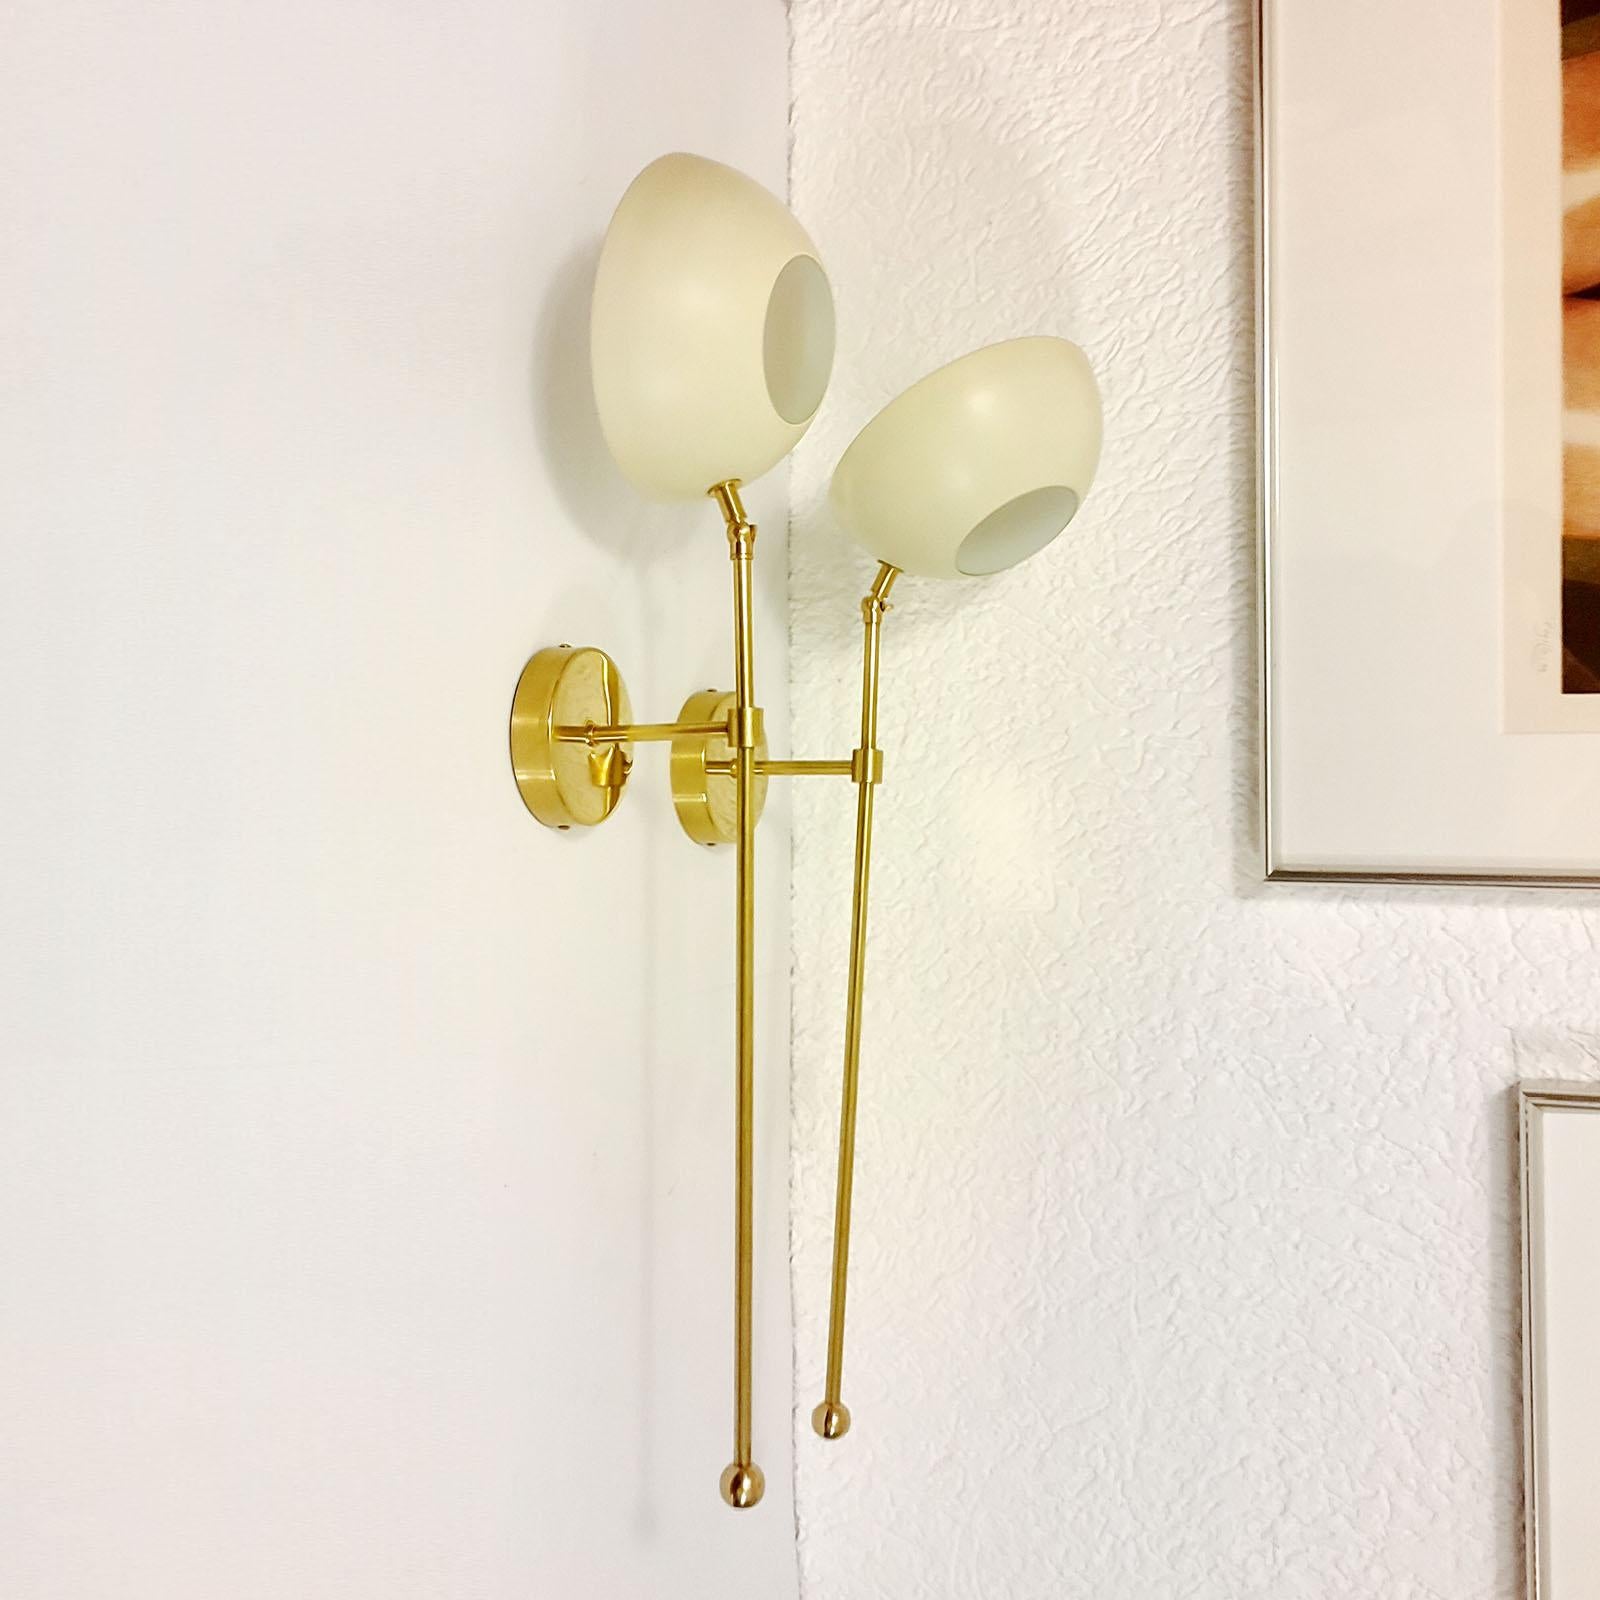 Pair of Italian Wall Lights, Brass and Ivory Lacquer, Stilnovo Style For Sale 6